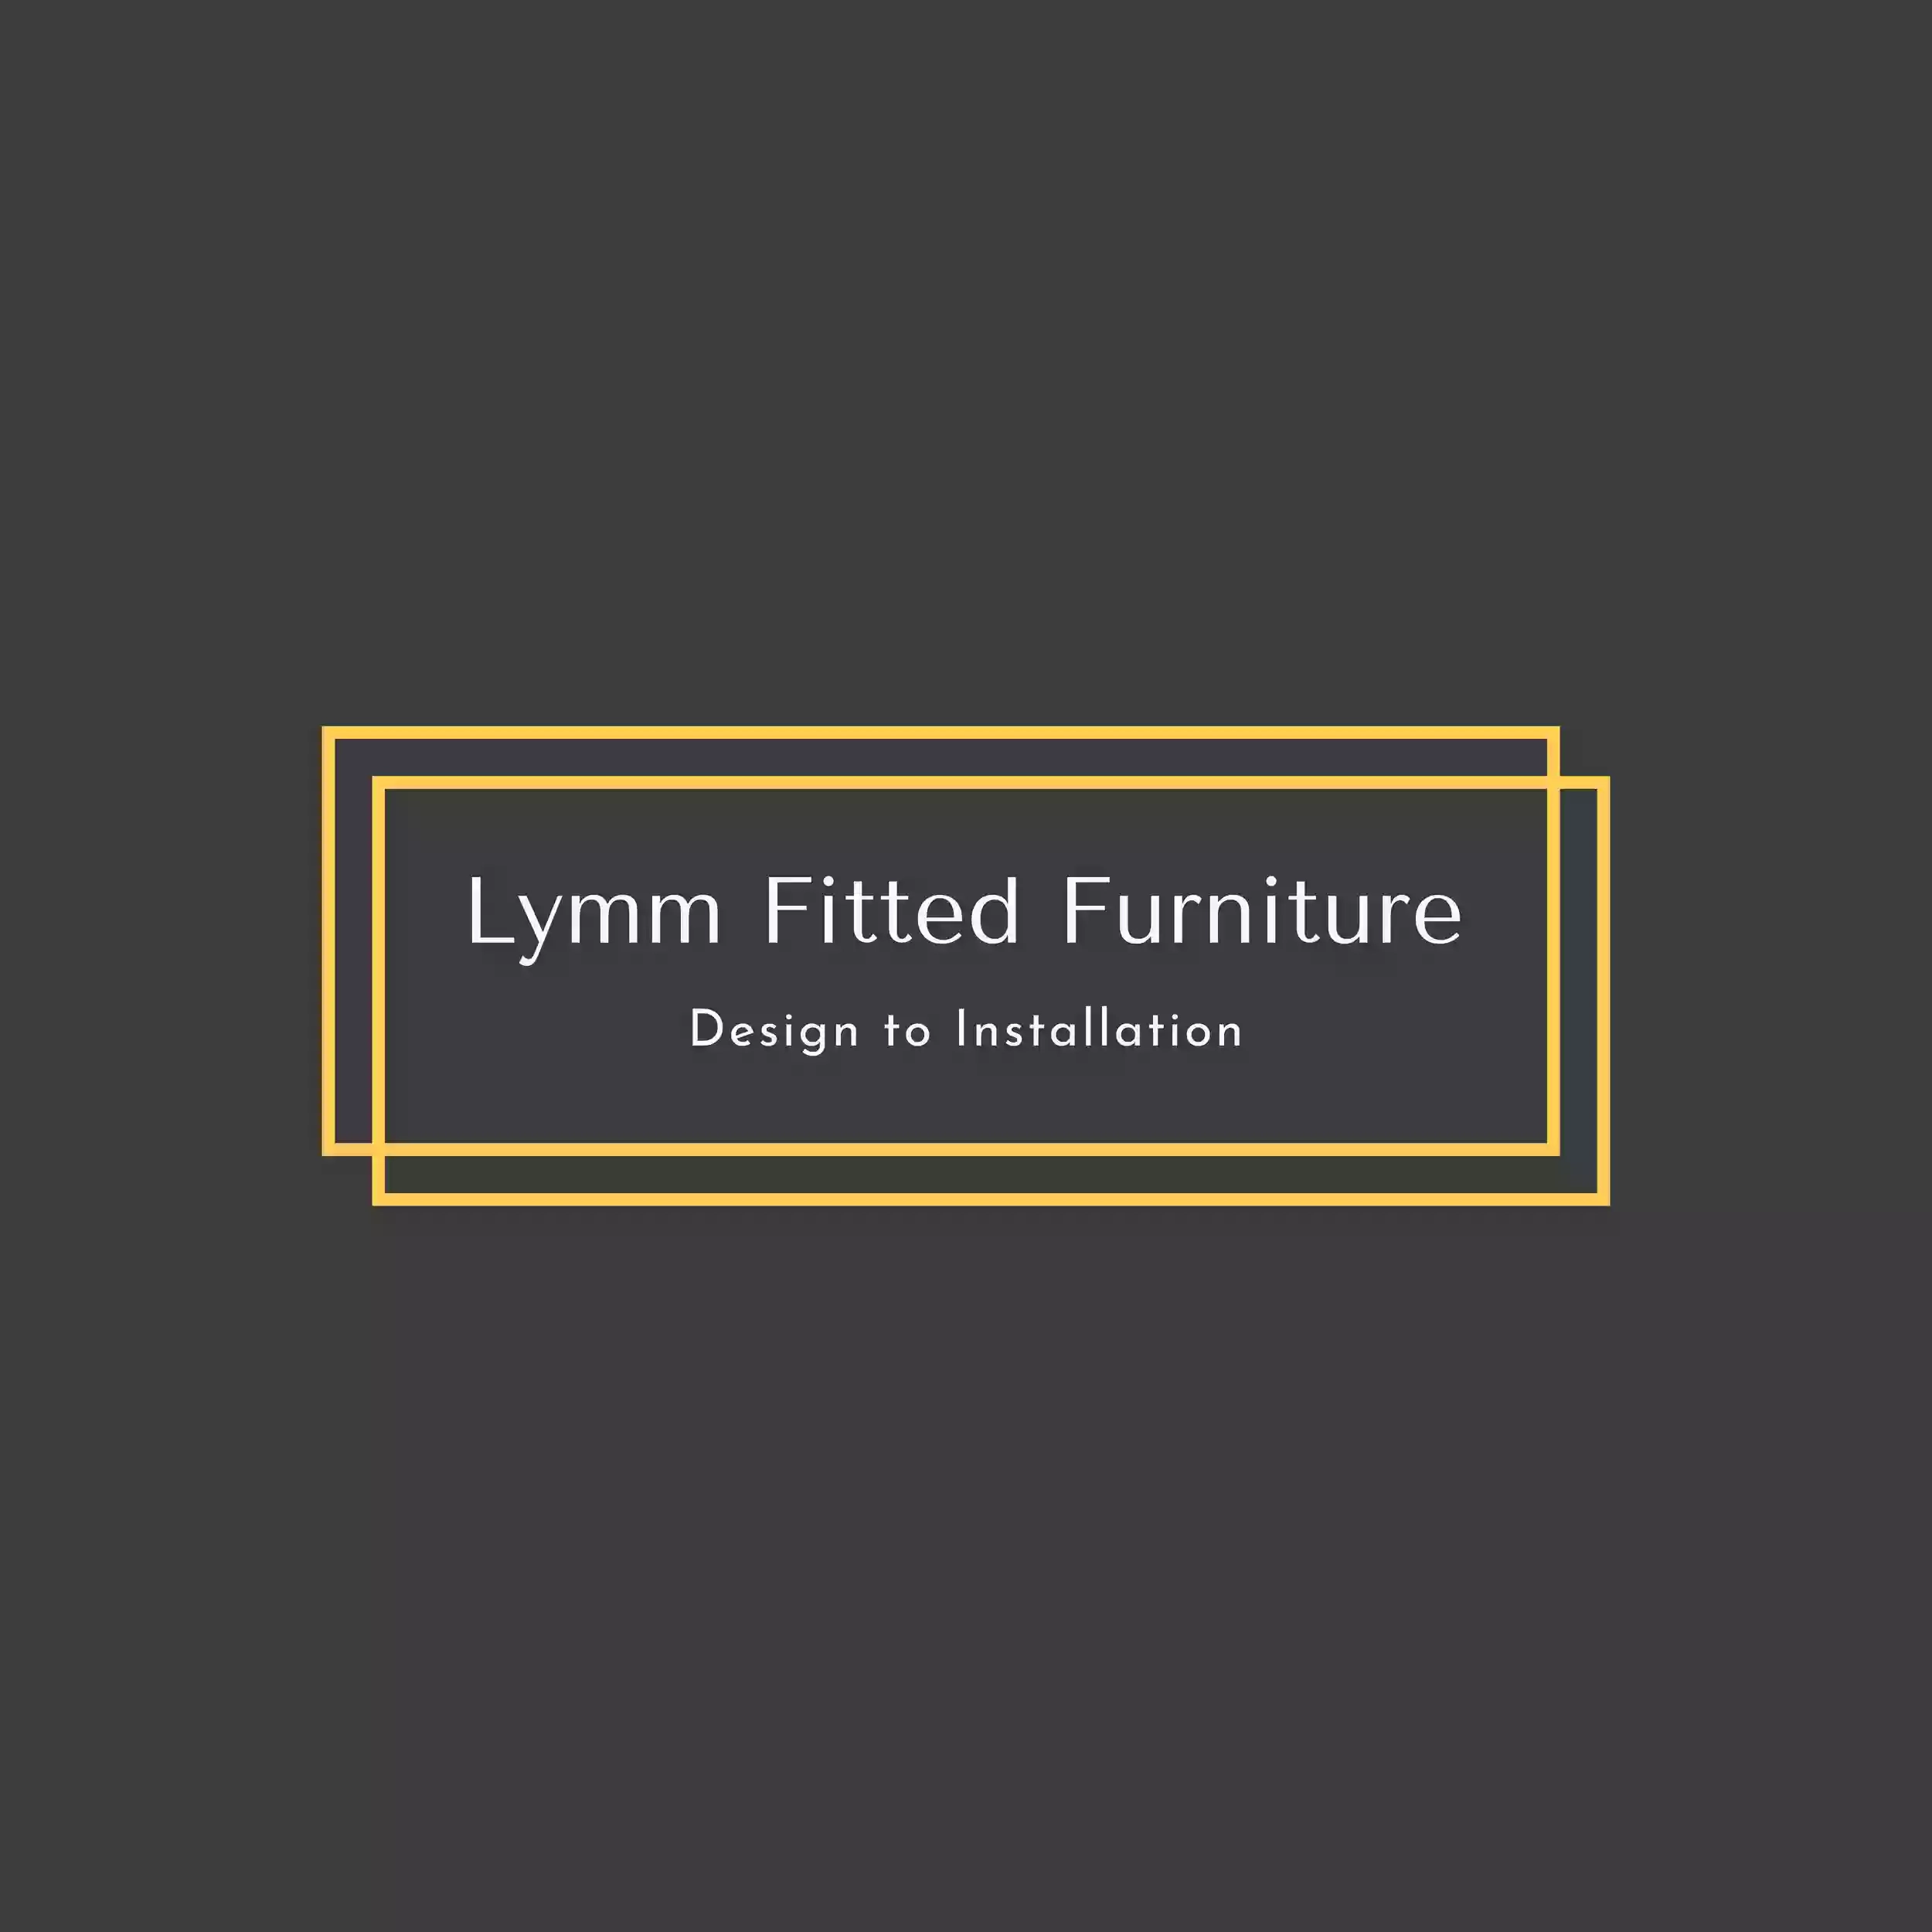 Lymm Fitted Furniture